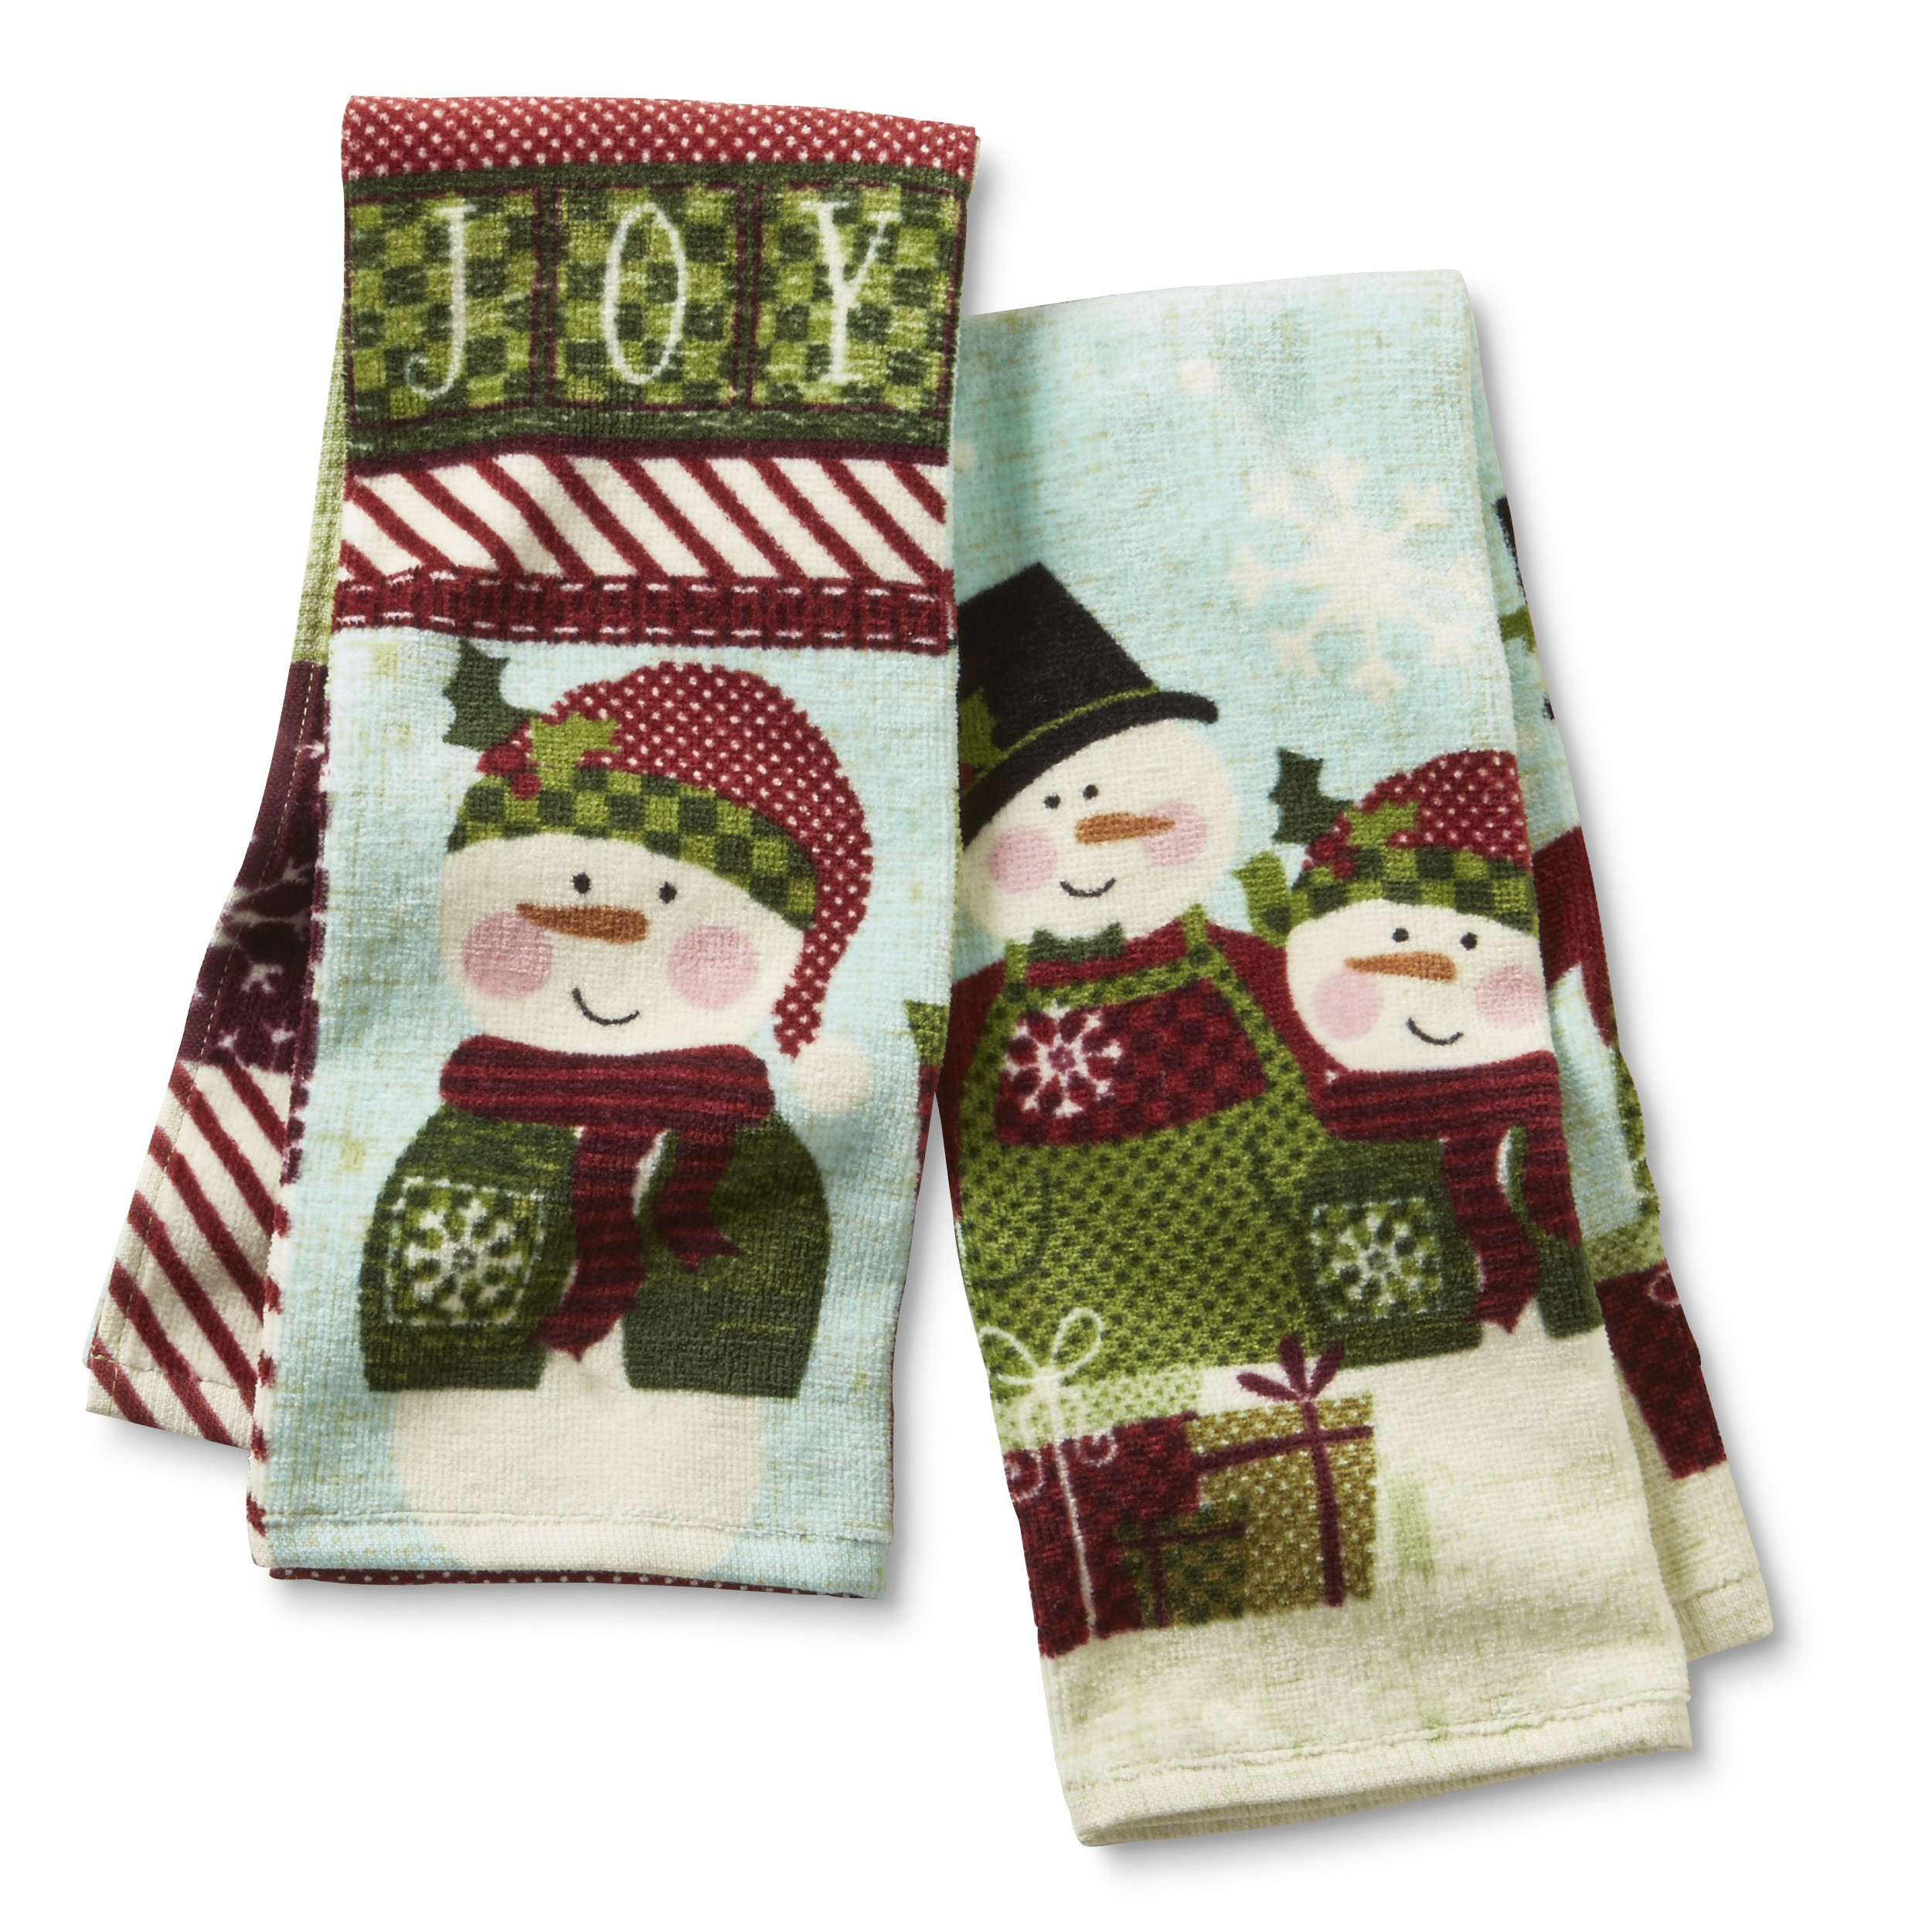 Christmas Kitchen Towels
 Trim A Home 2 Pack Christmas Kitchen Towels Snowman